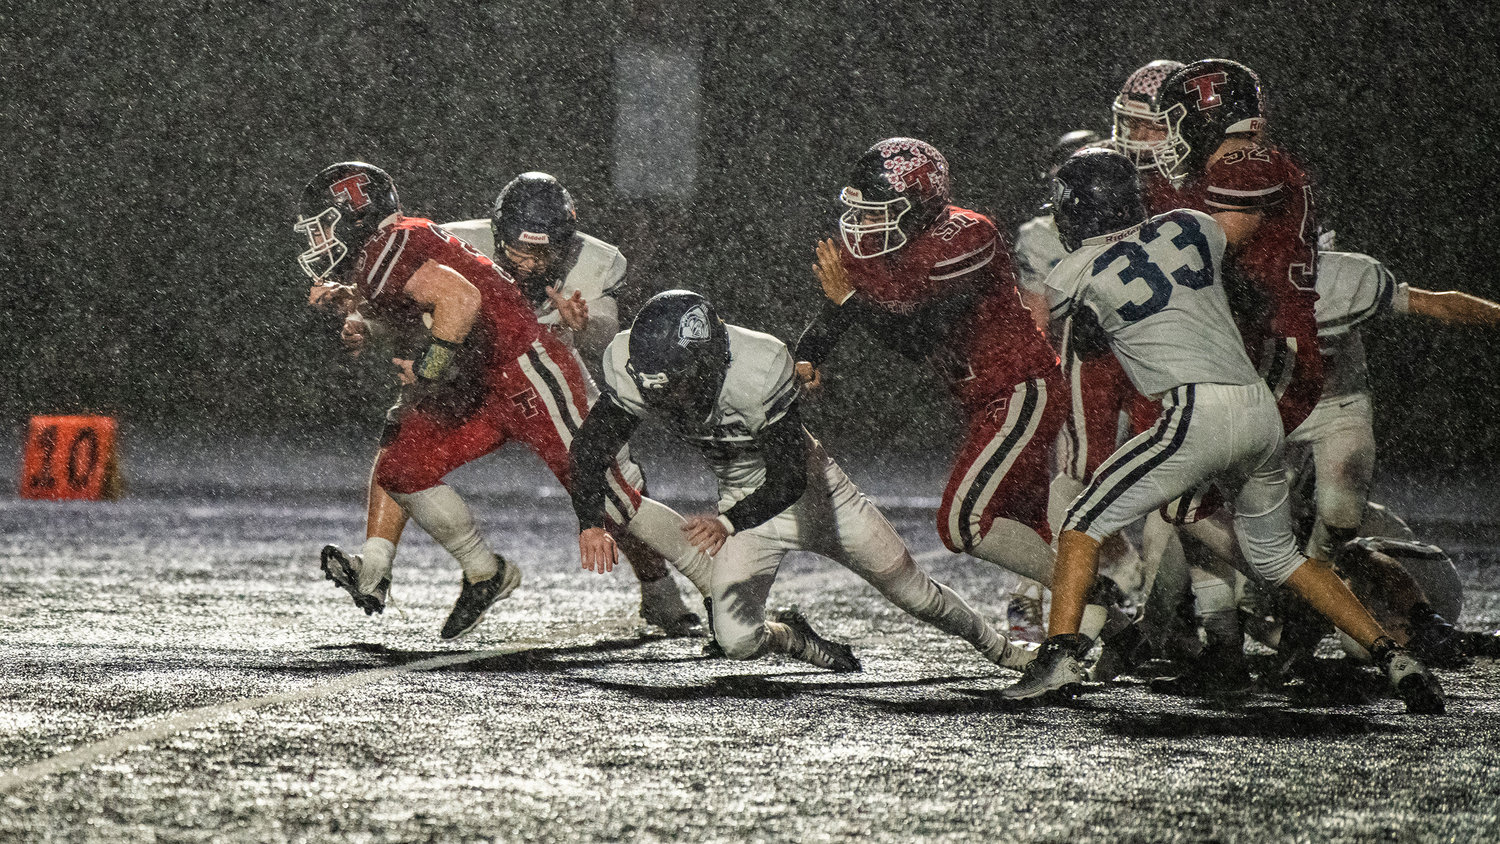 Tenino senior Randall Marti (34) blows past defenders with the football during a Friday night game at Beaver Stadium.